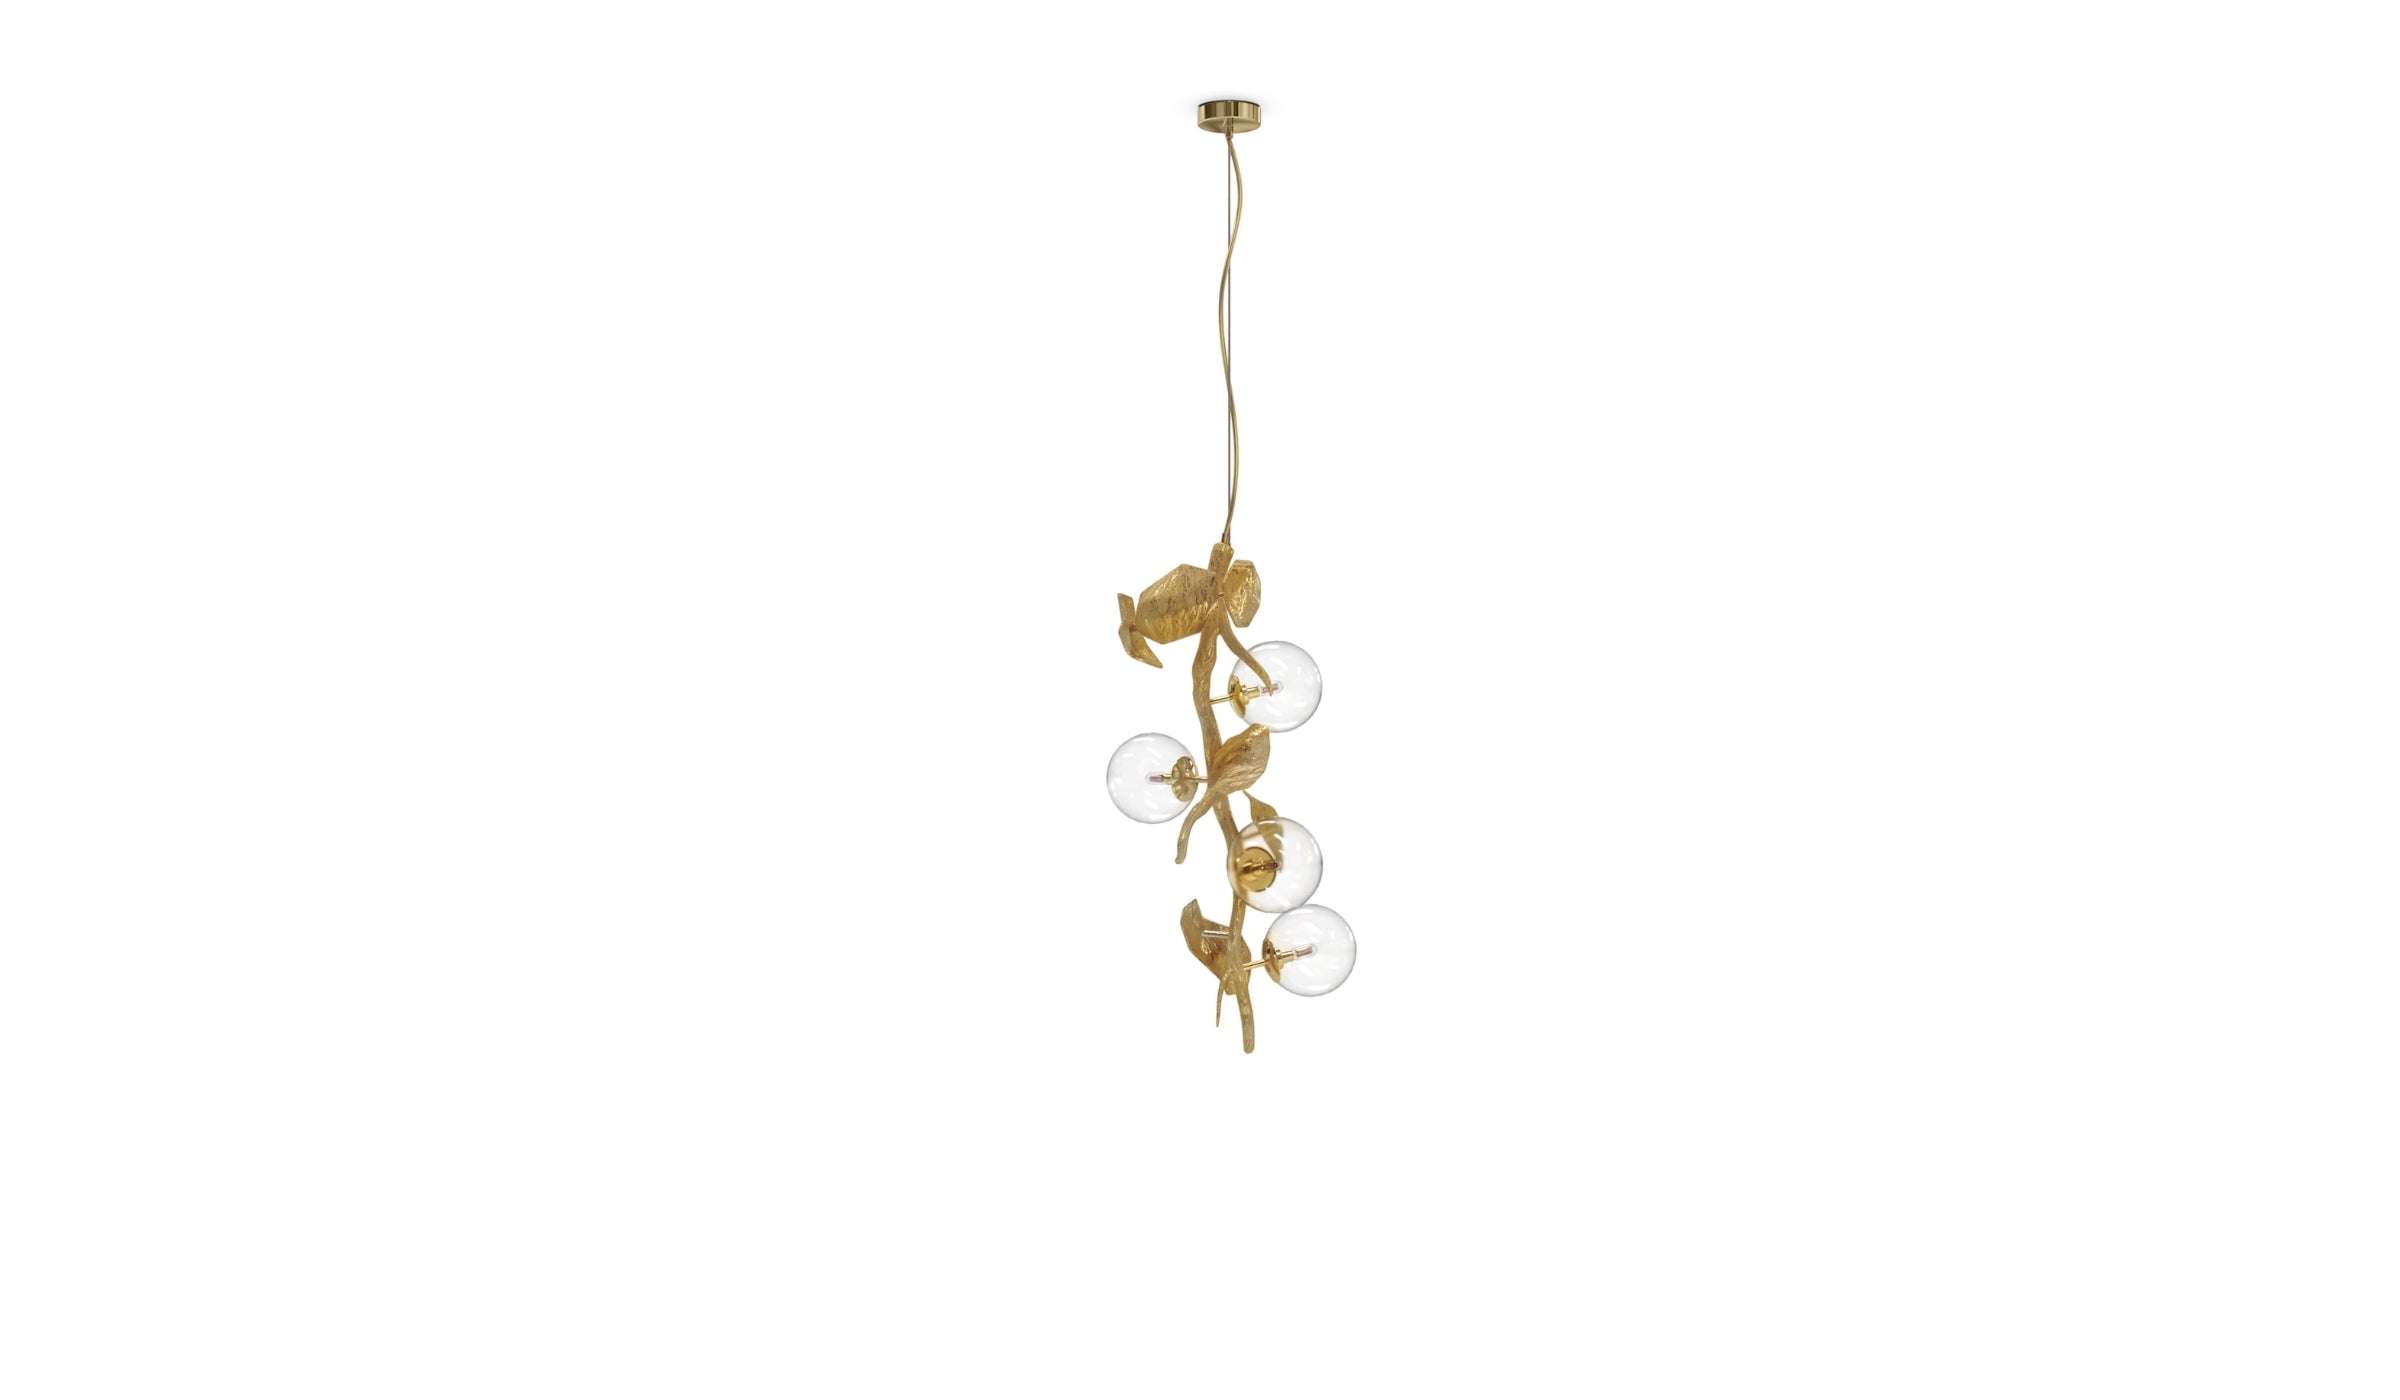 Hera - Luxurious single pendant light in polished brass and glass for sophisticated decoration